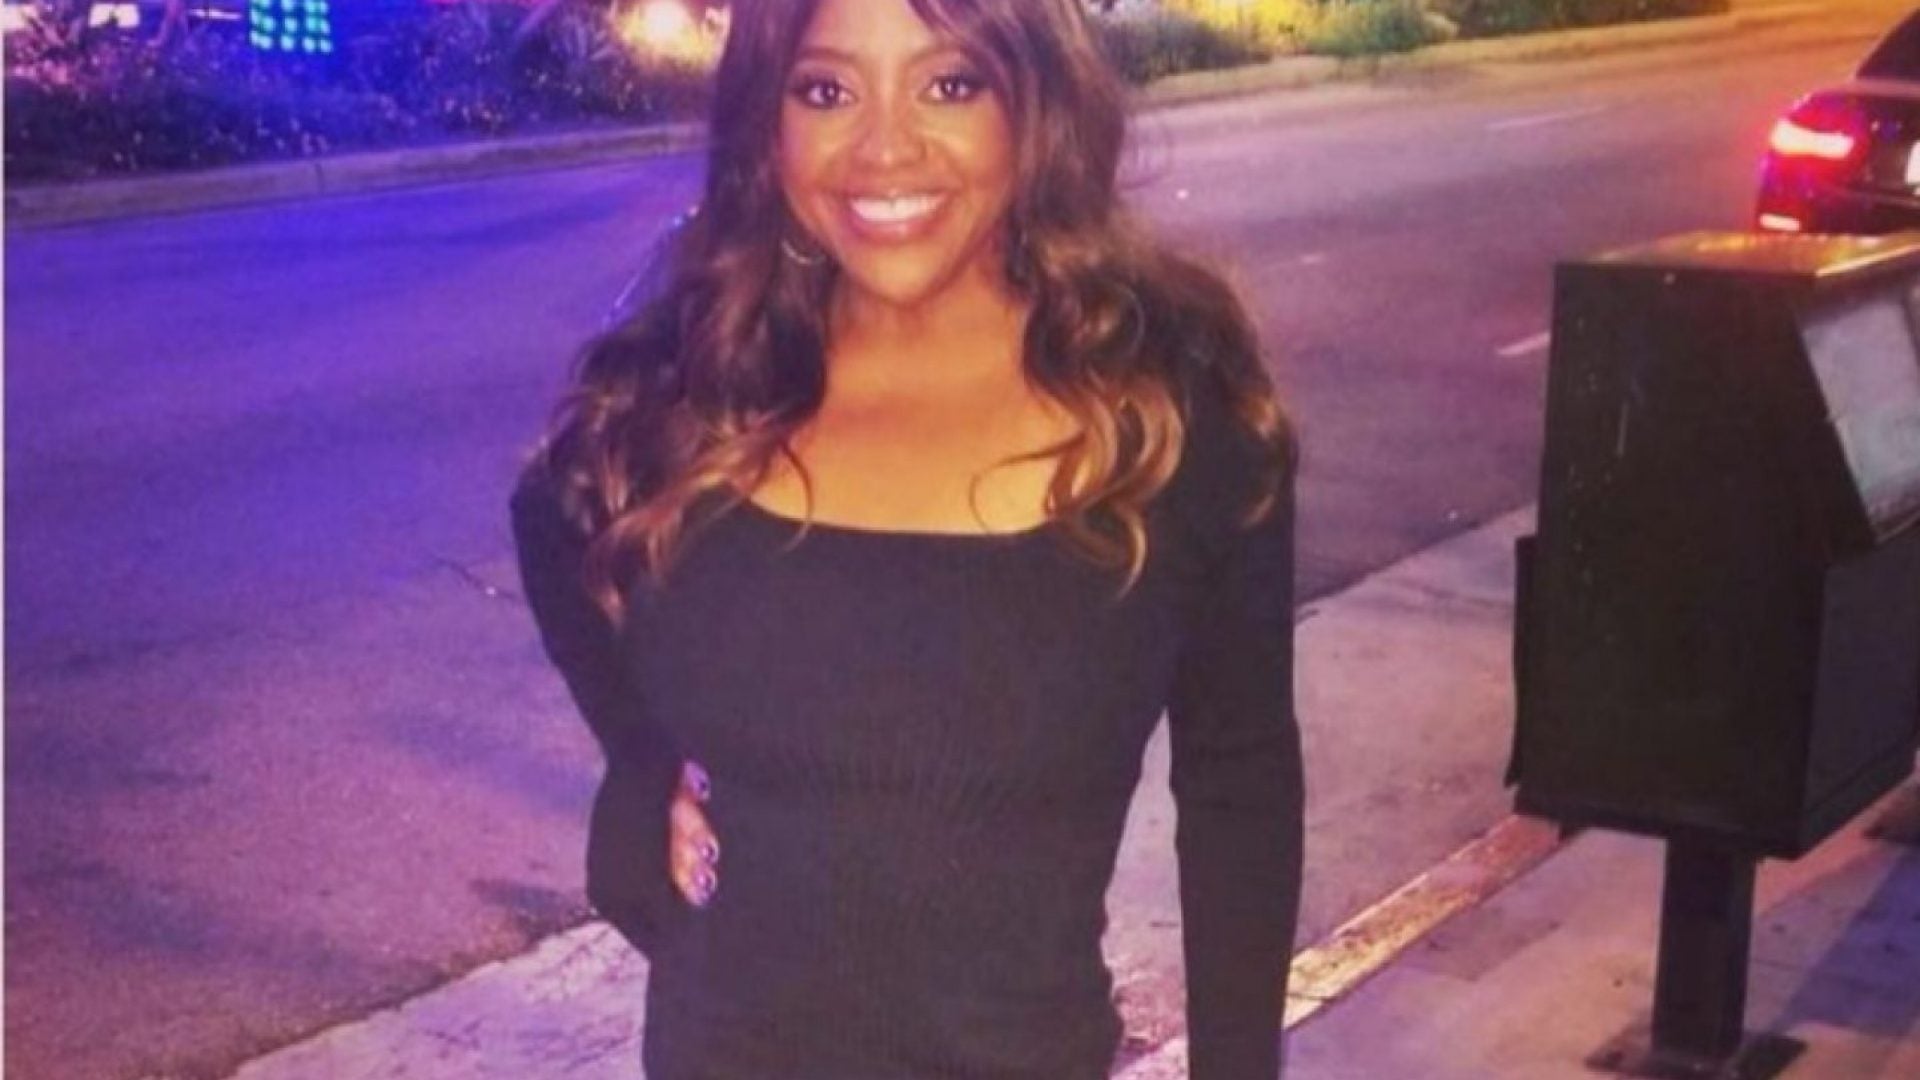 Sherri Shepherd Dazzles While Showing Off Keto Diet Results In Curve-Hugging Dress